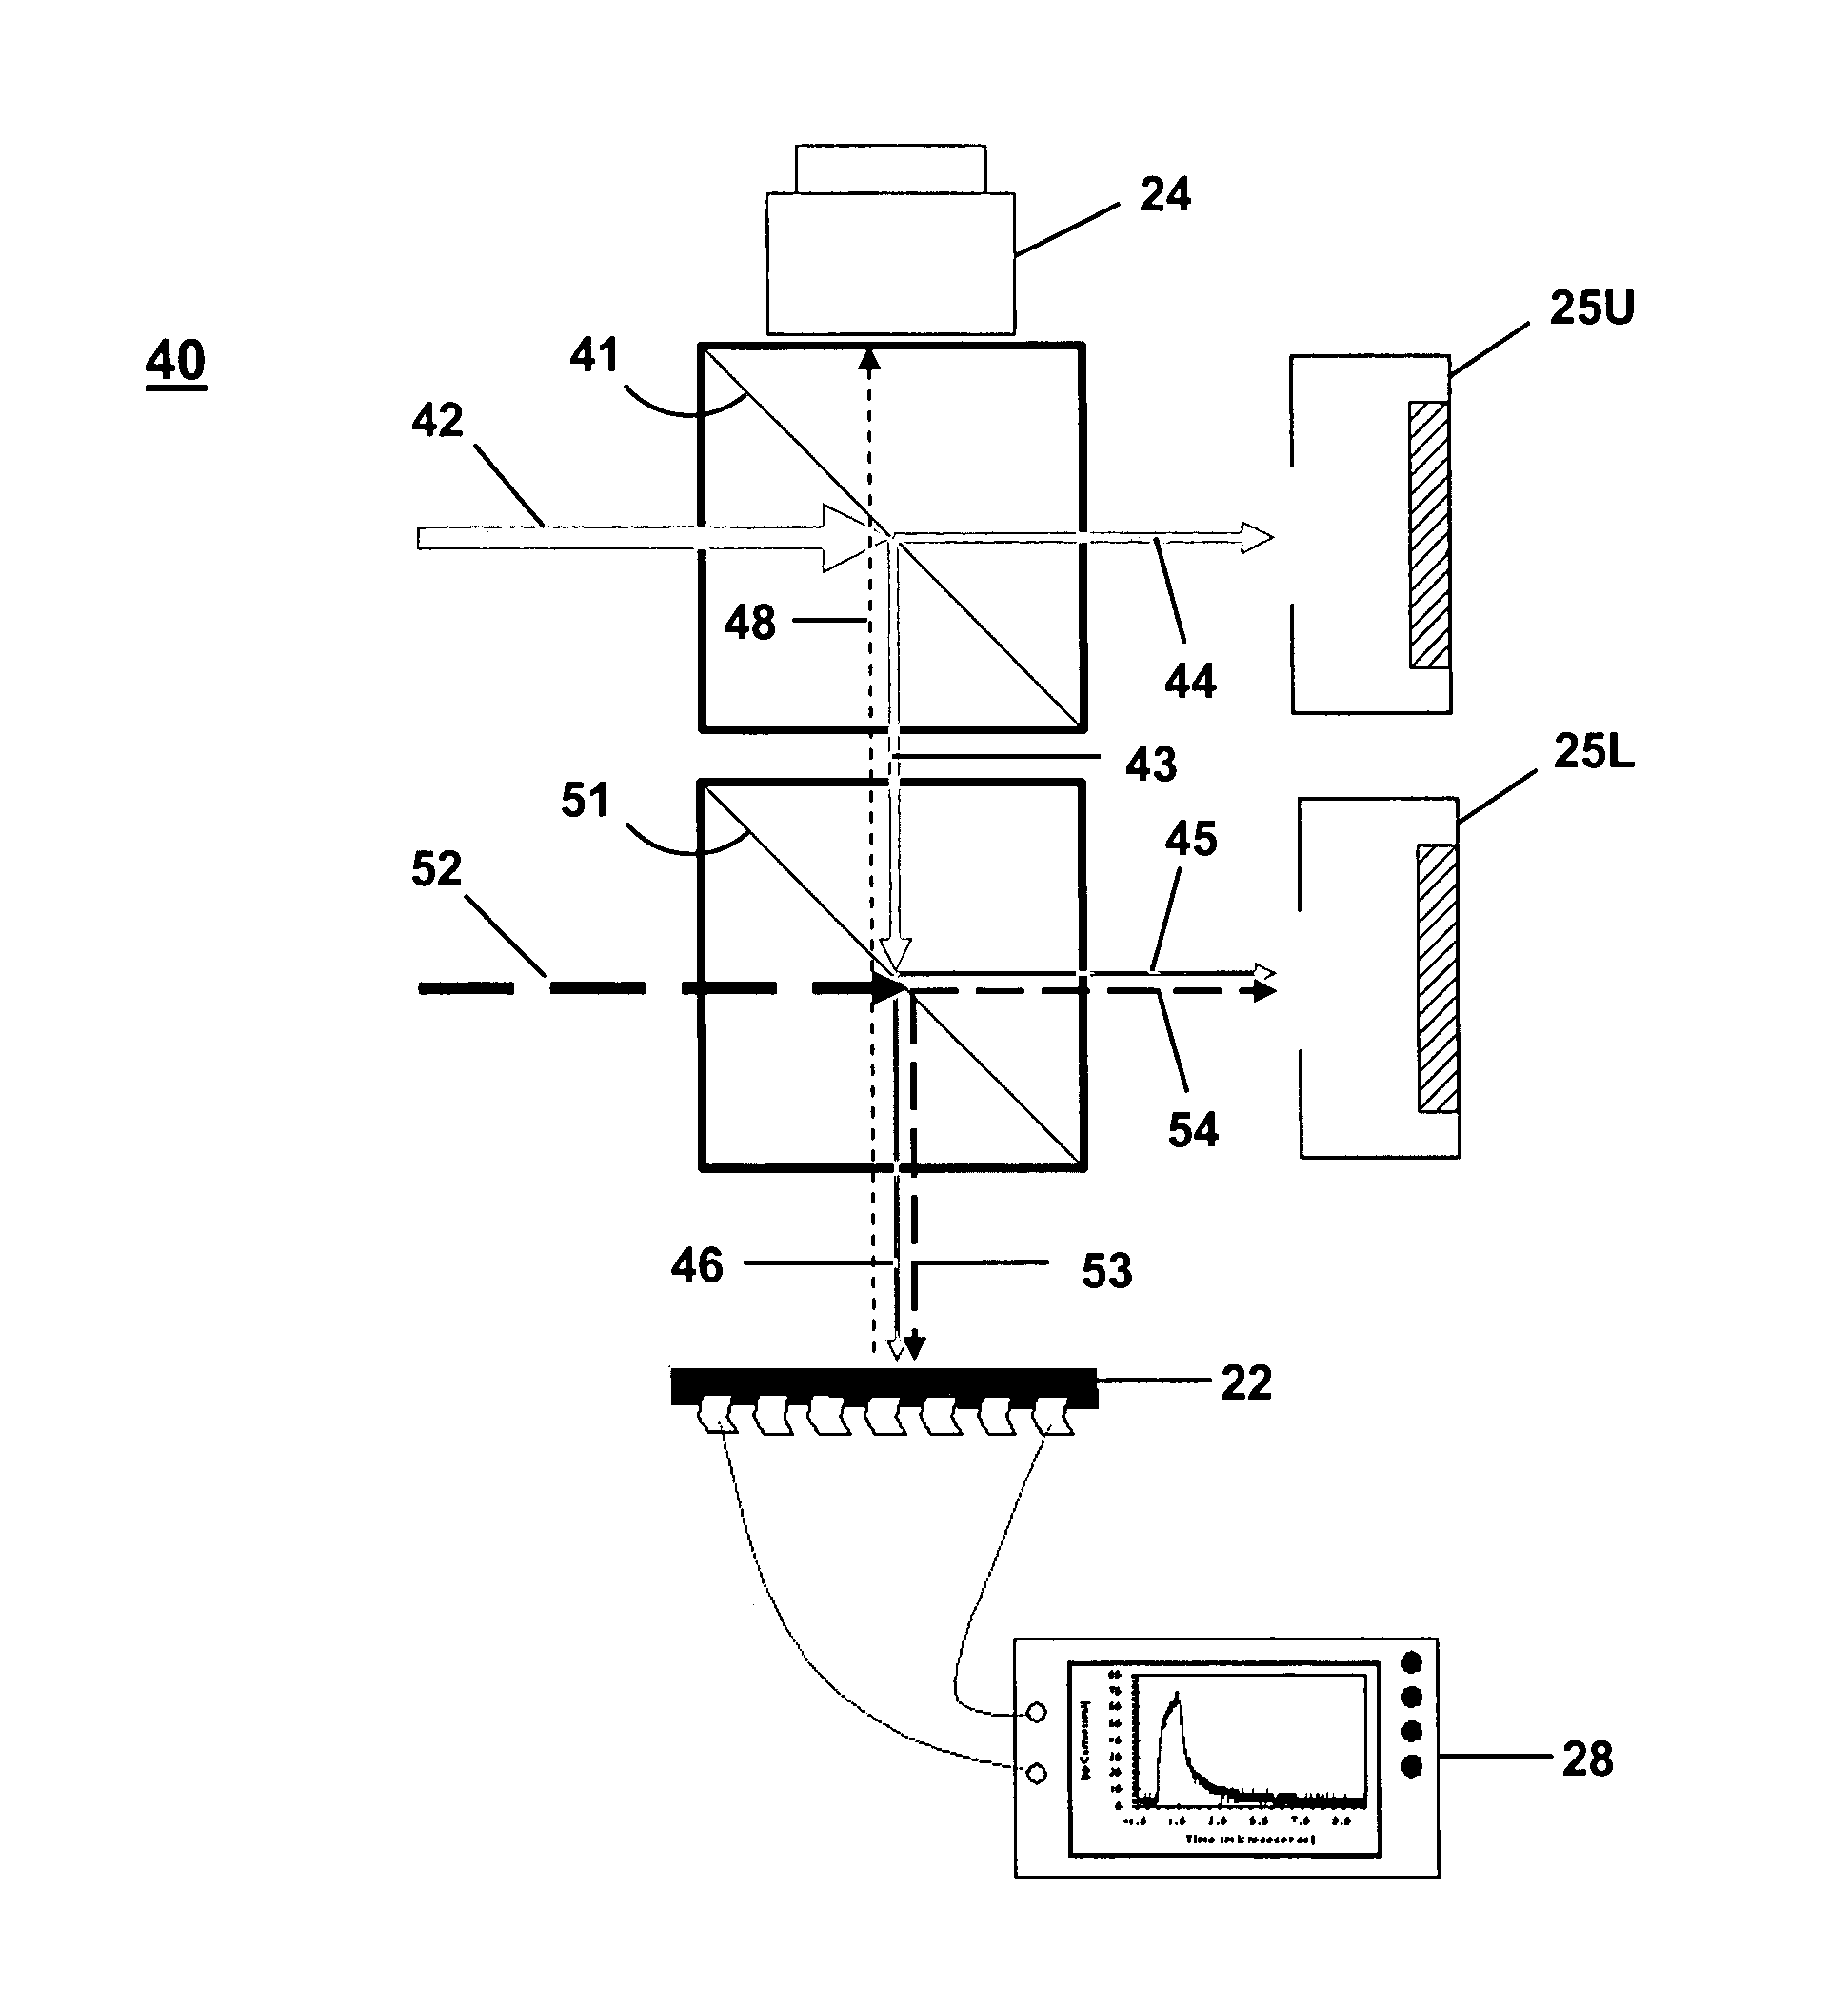 Laser-based irradiation apparatus and method to measure the functional dose-rate response of semiconductor devices